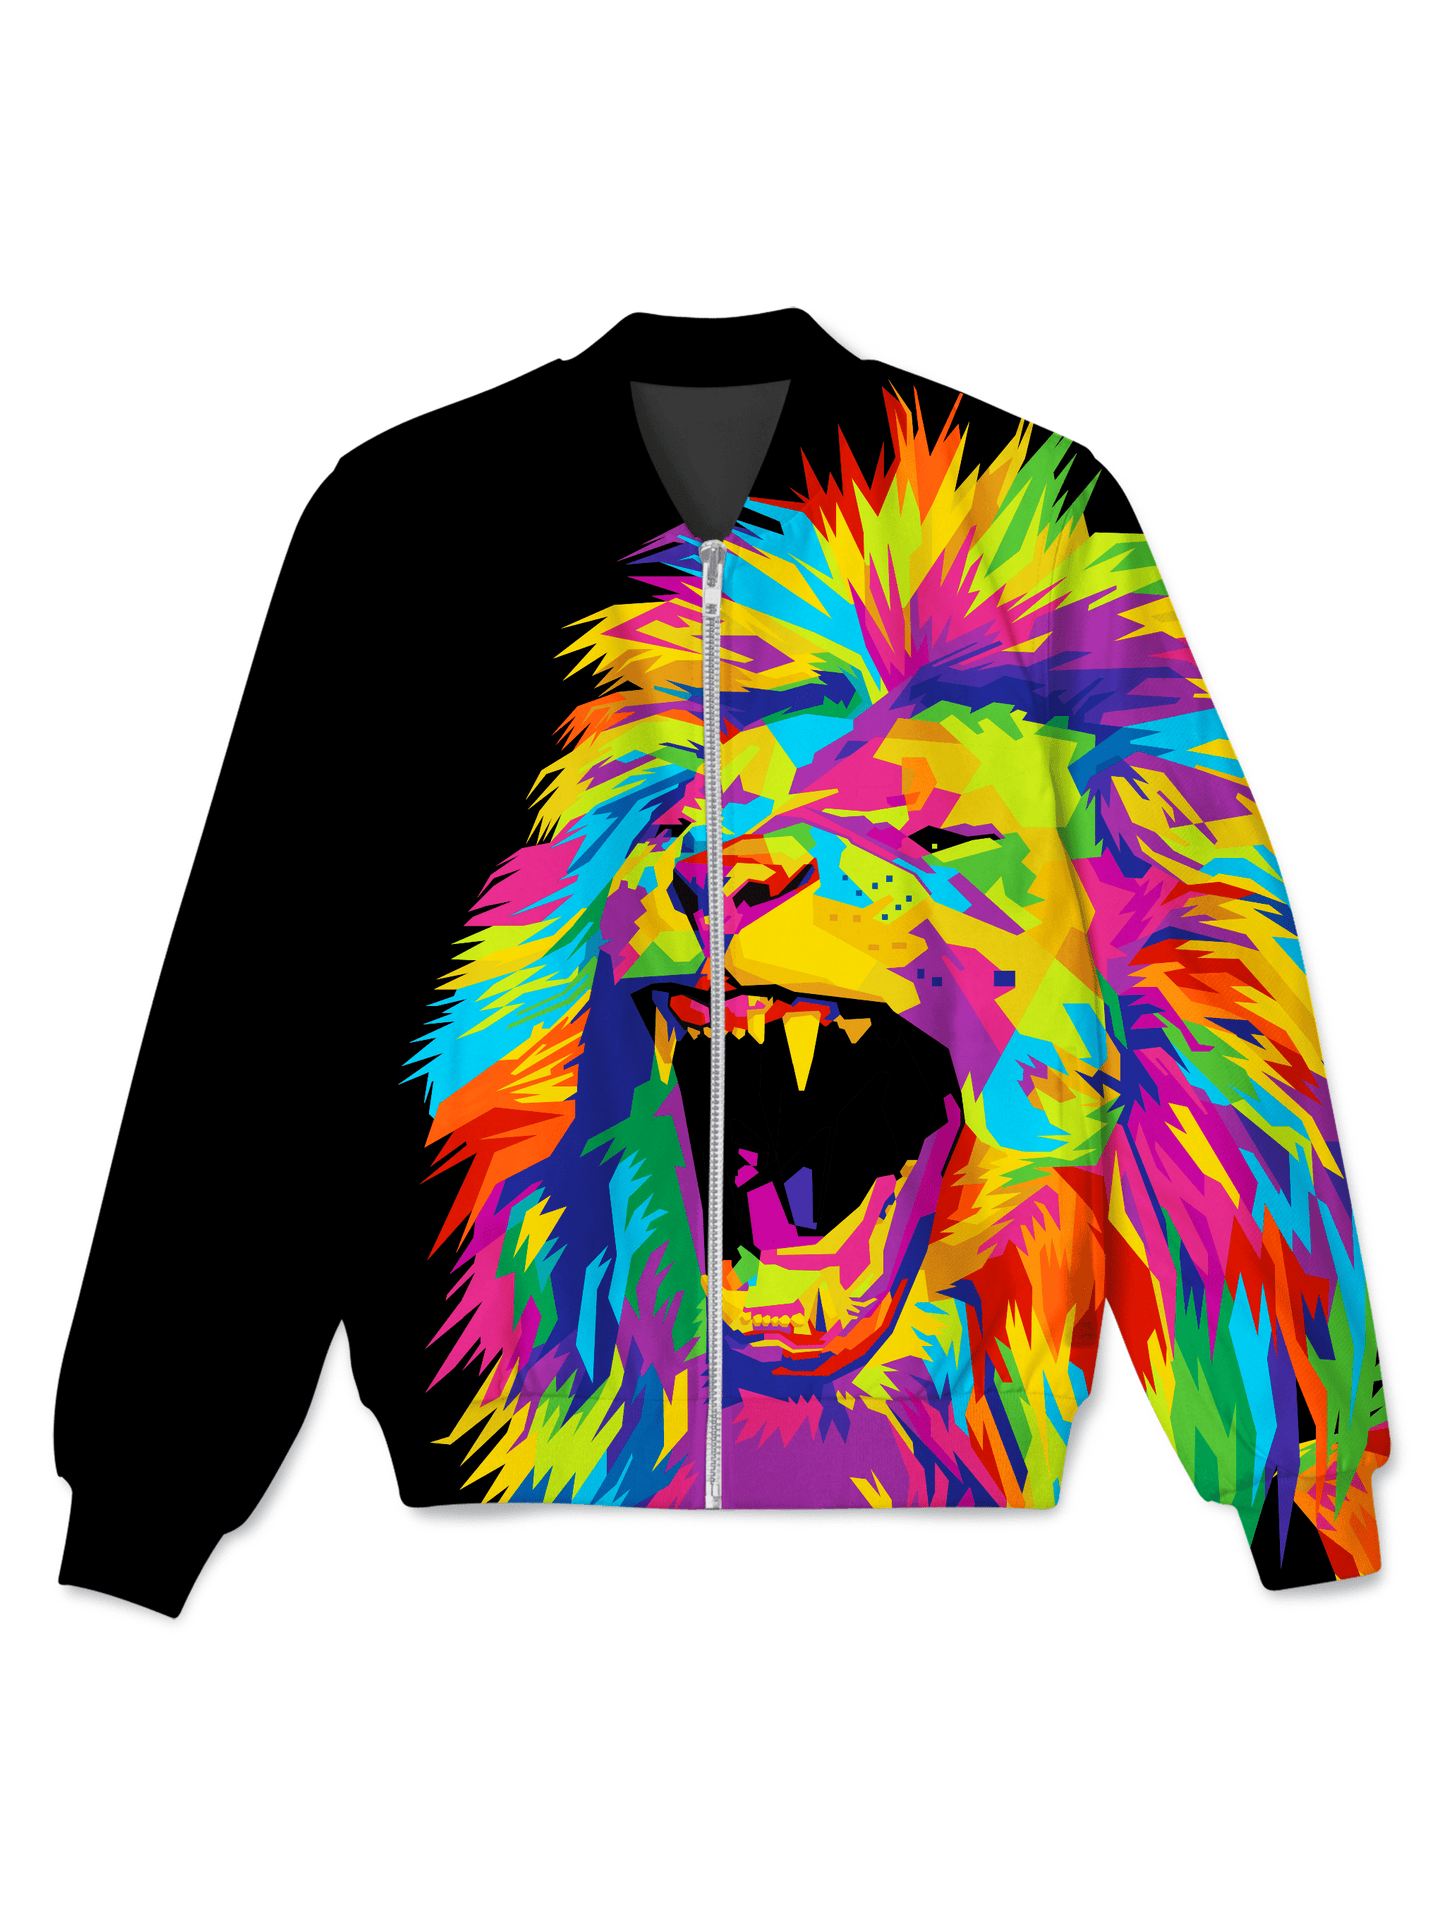 Psychedelic Lion Bomber Jacket, Noctum X Truth, | iEDM